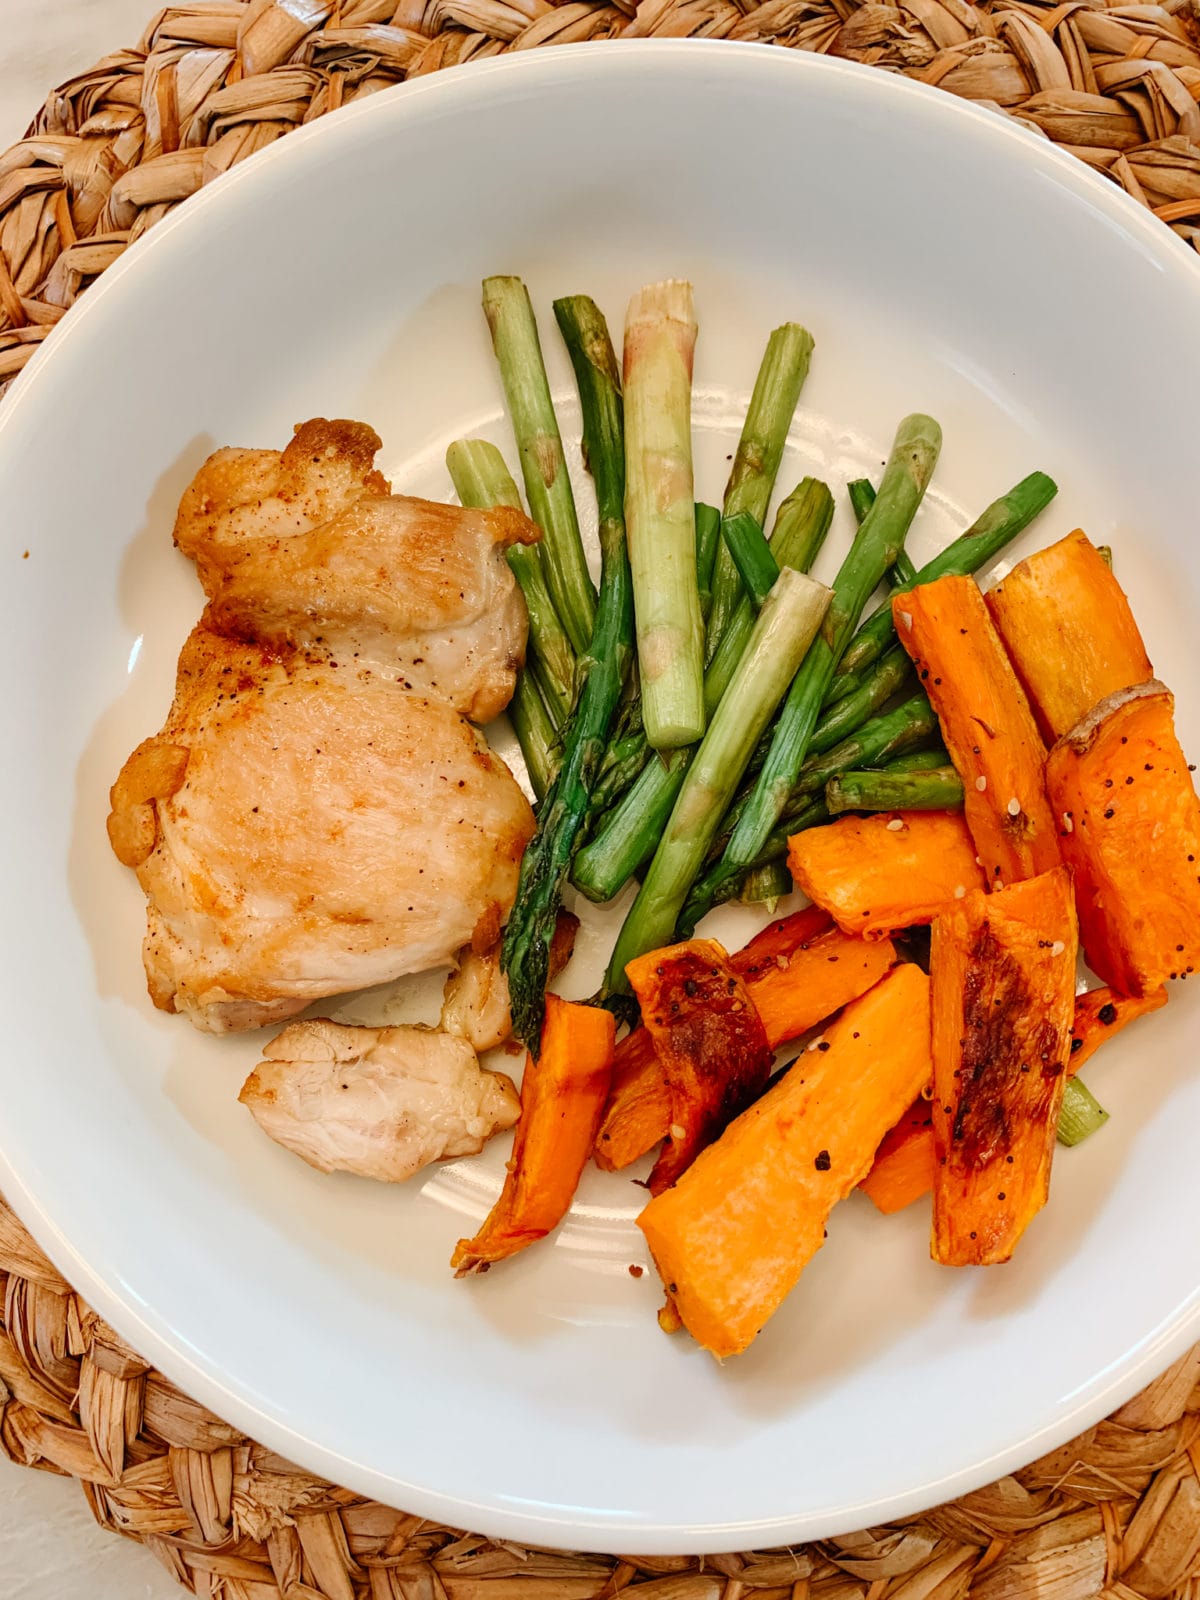 CHICKEN THIGHS WITH ASPARAGUS & SWEET POTATO FRIES